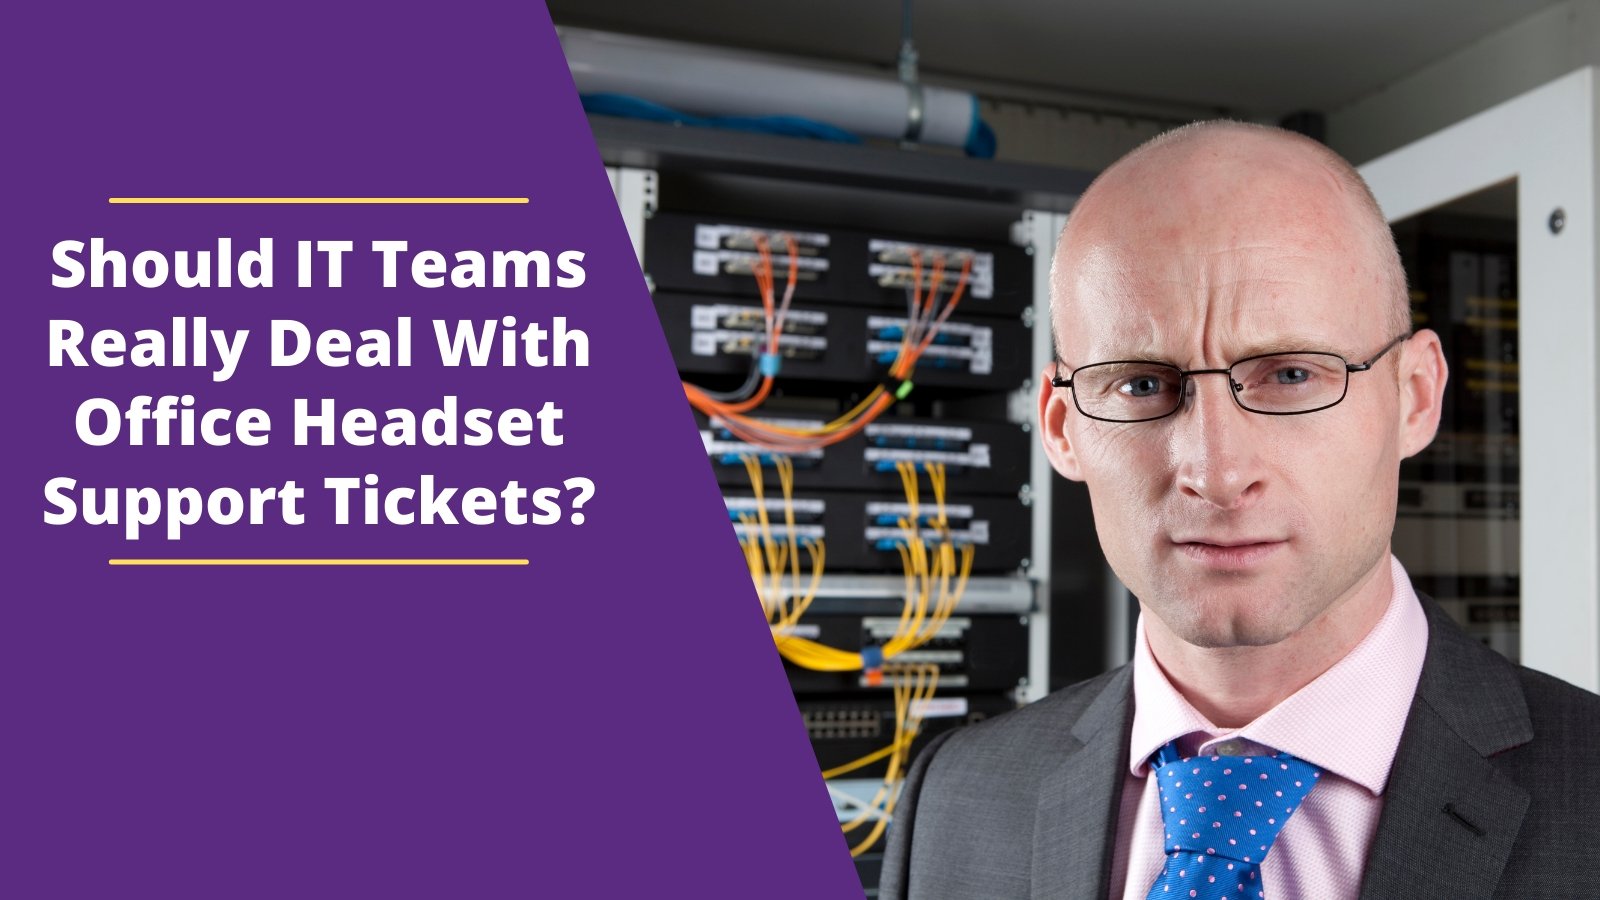 Should IT Teams Really Deal With Office Headset Support Tickets? - Headset Advisor